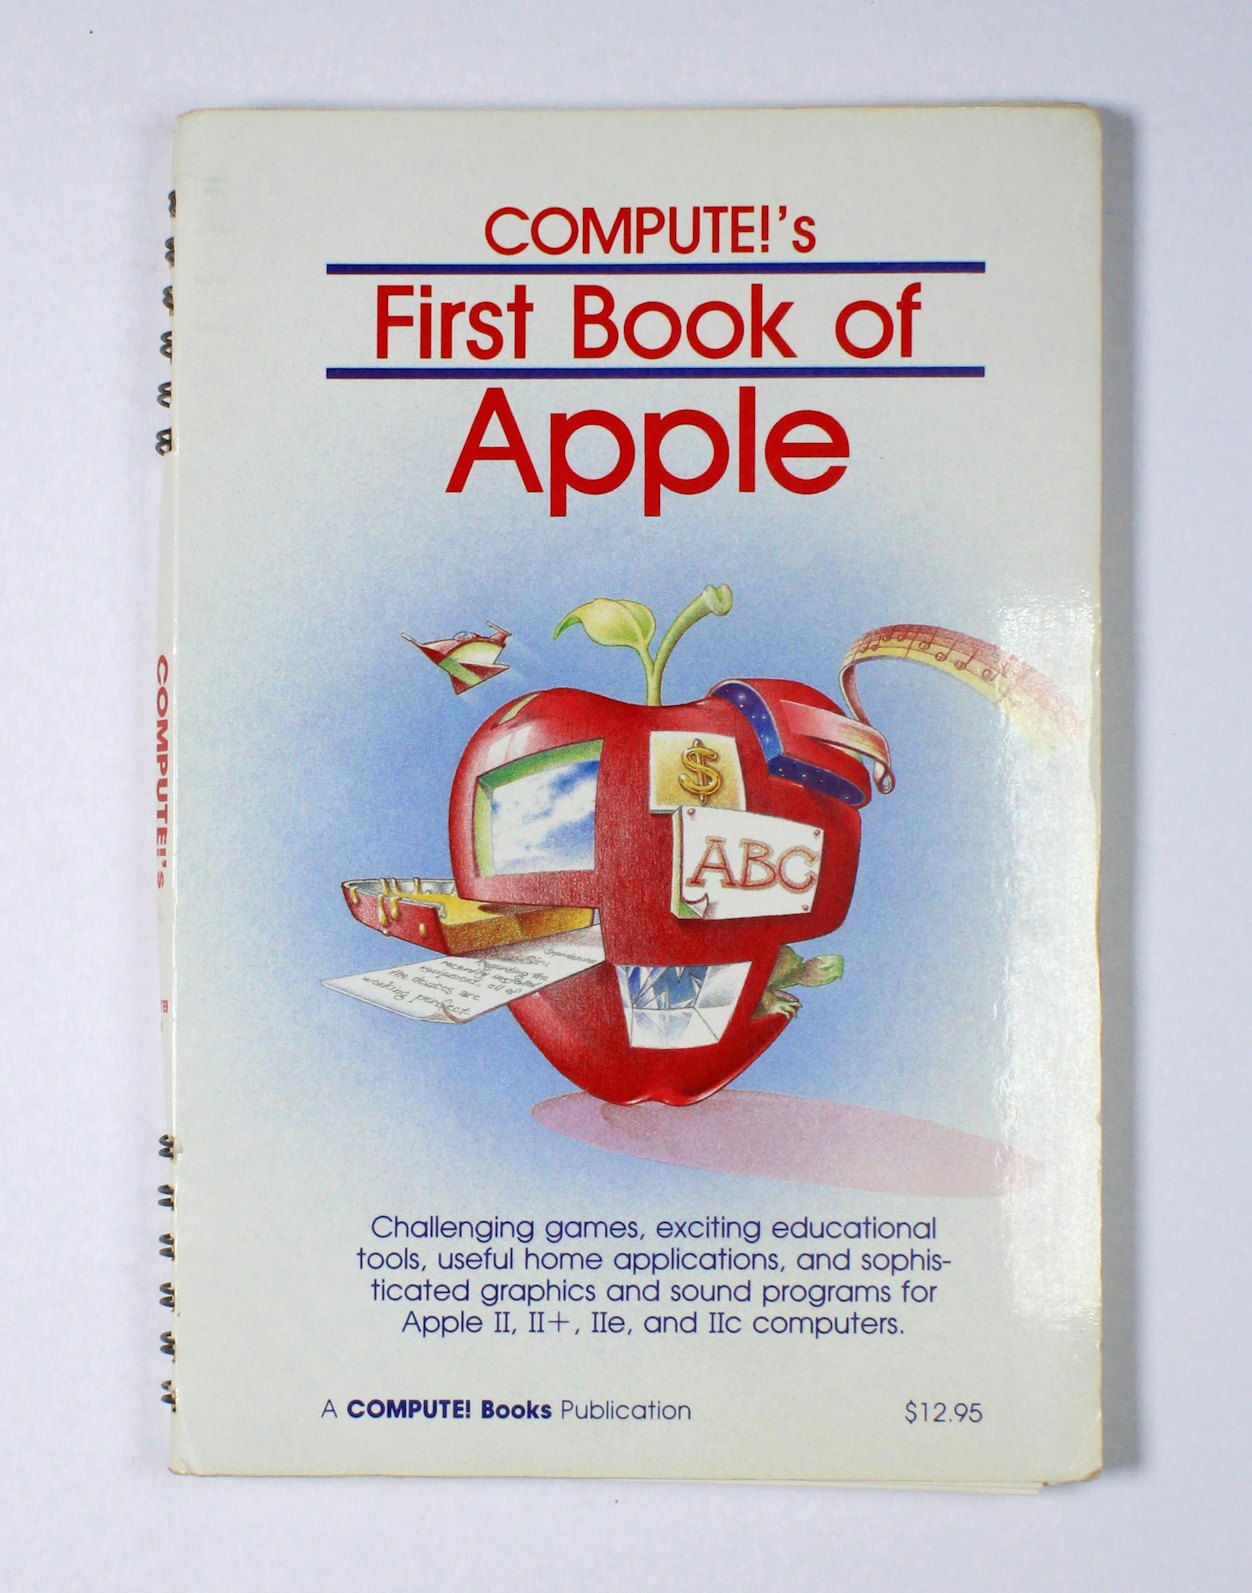 COMPUTE!'s First Book of Apple